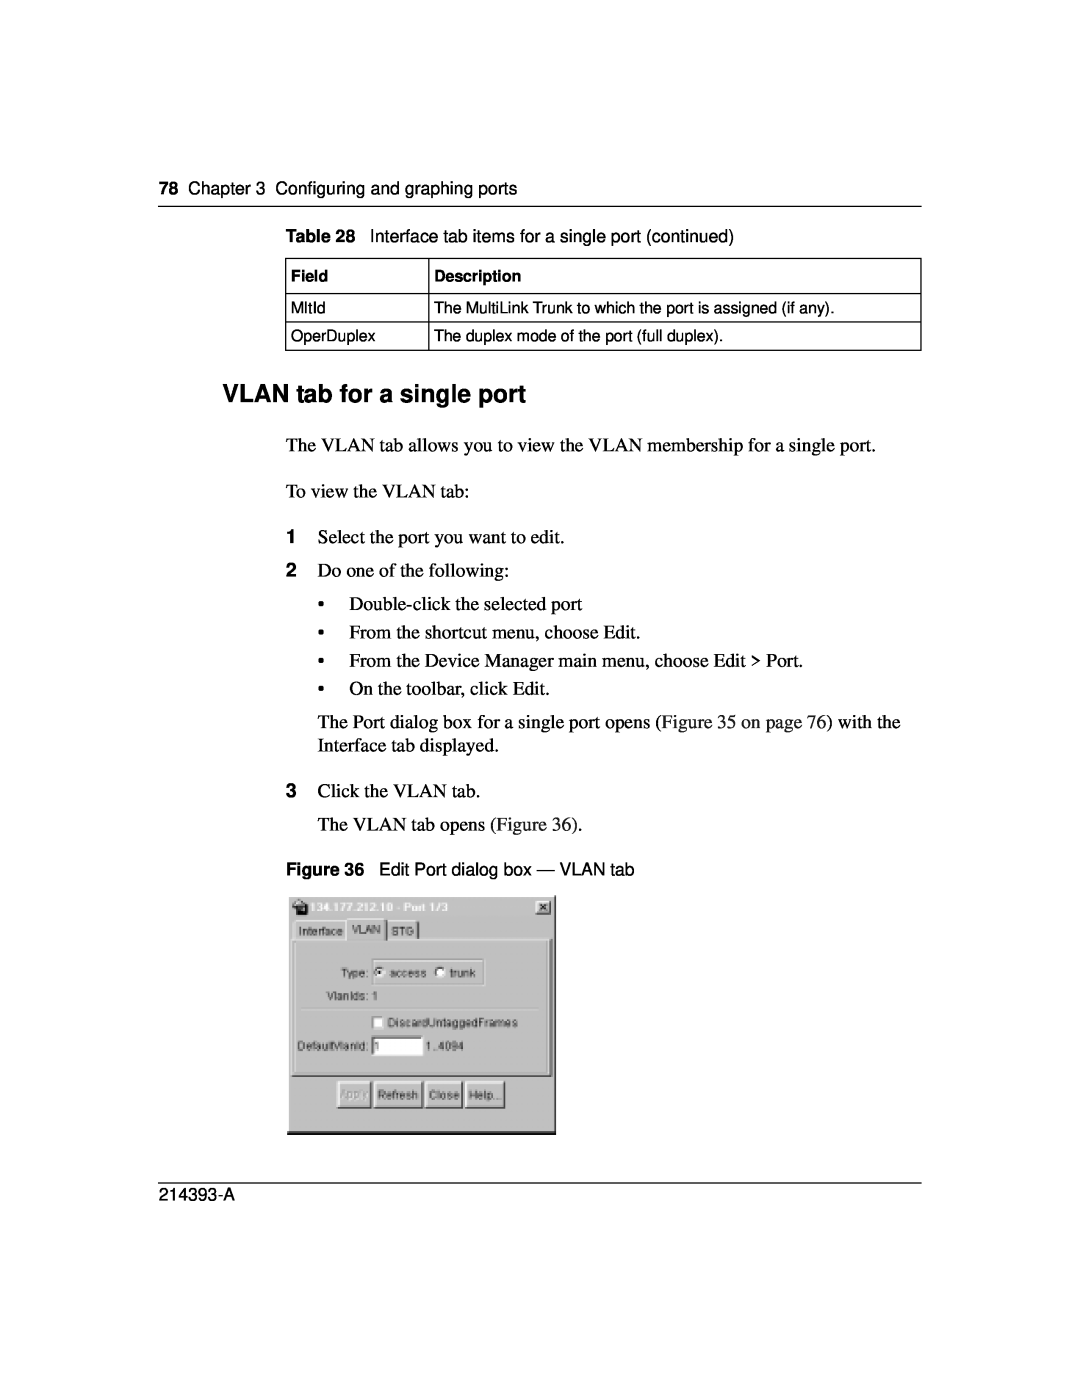 Nortel Networks 214393-A manual VLAN tab for a single port 